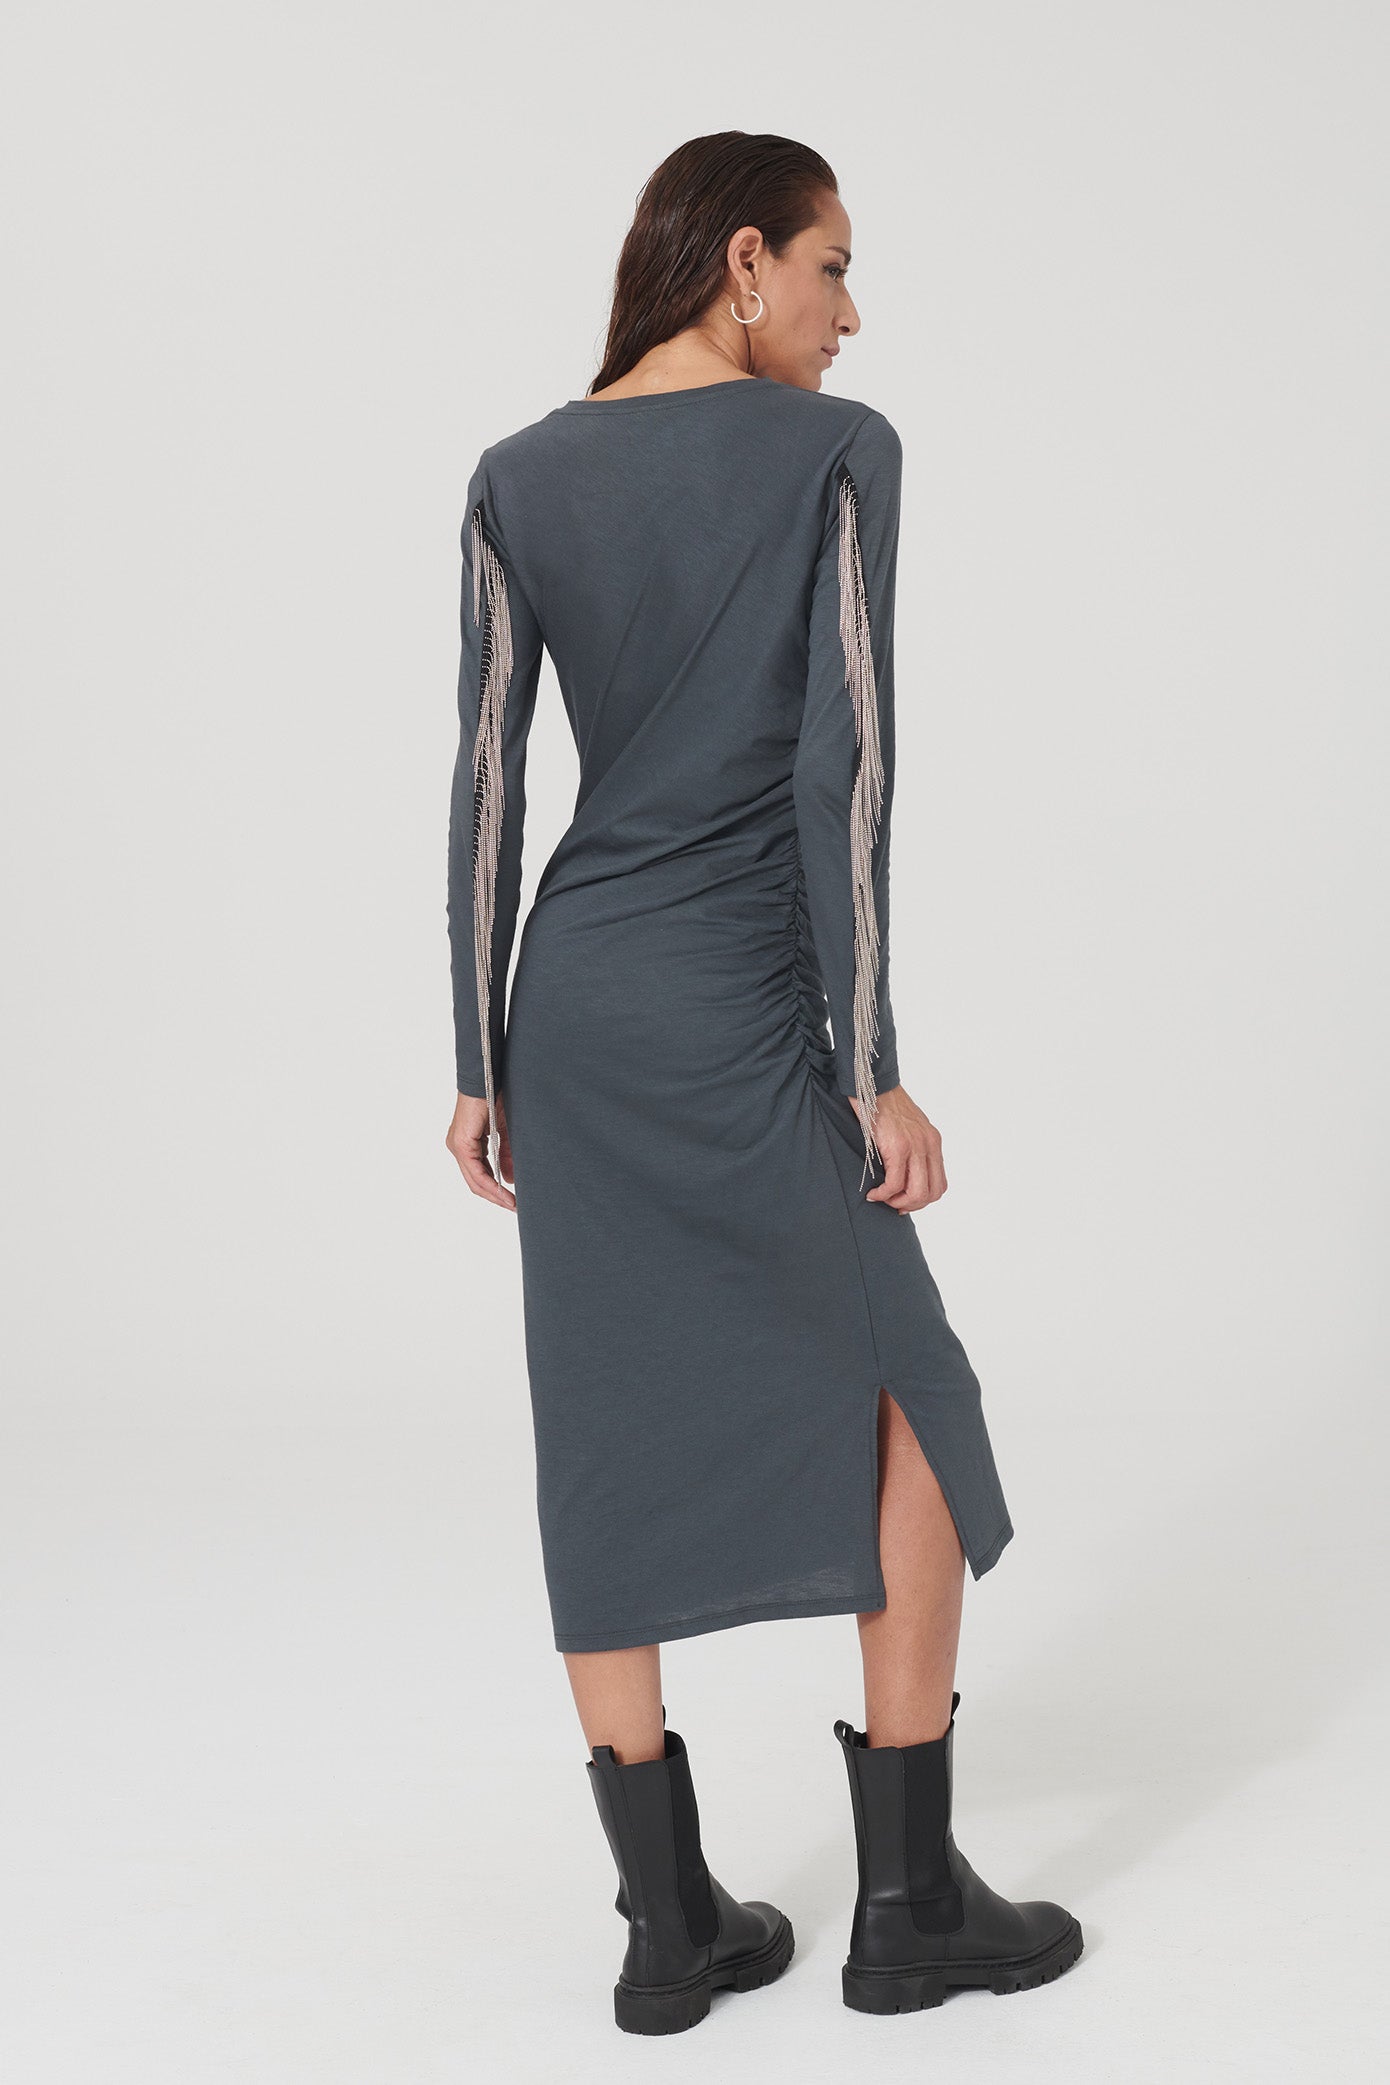 Dress BEAUVOIR in gray by LOVJOI made of organic cotton (ST)